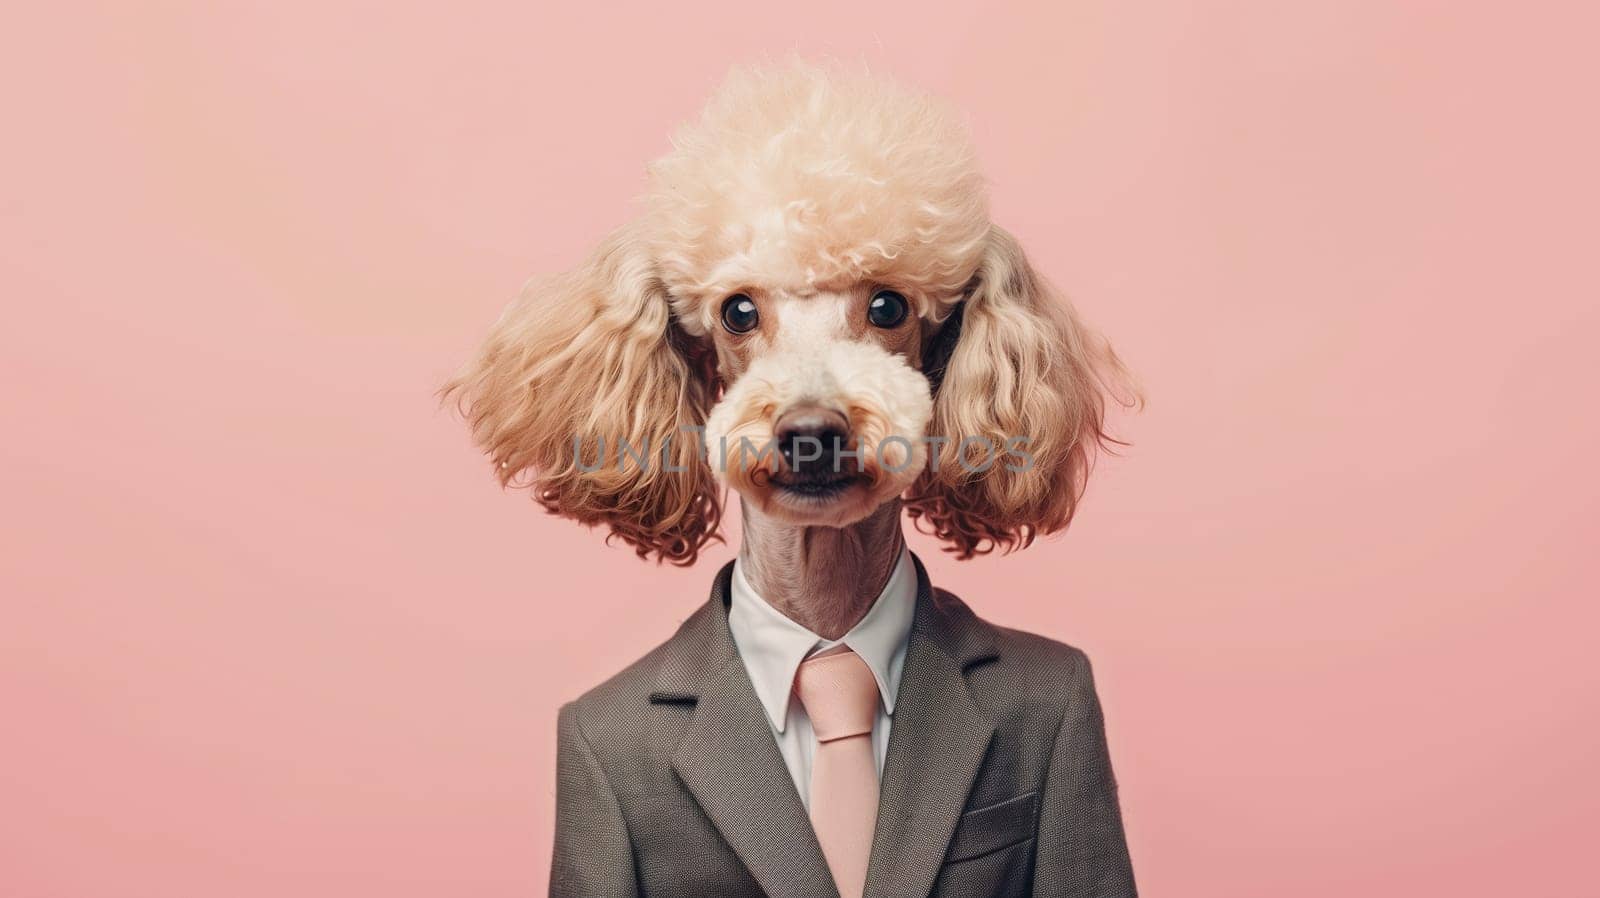 Portrait of stylish funny dog poodle in business suit looking at the camera on a pink background by Rohappy